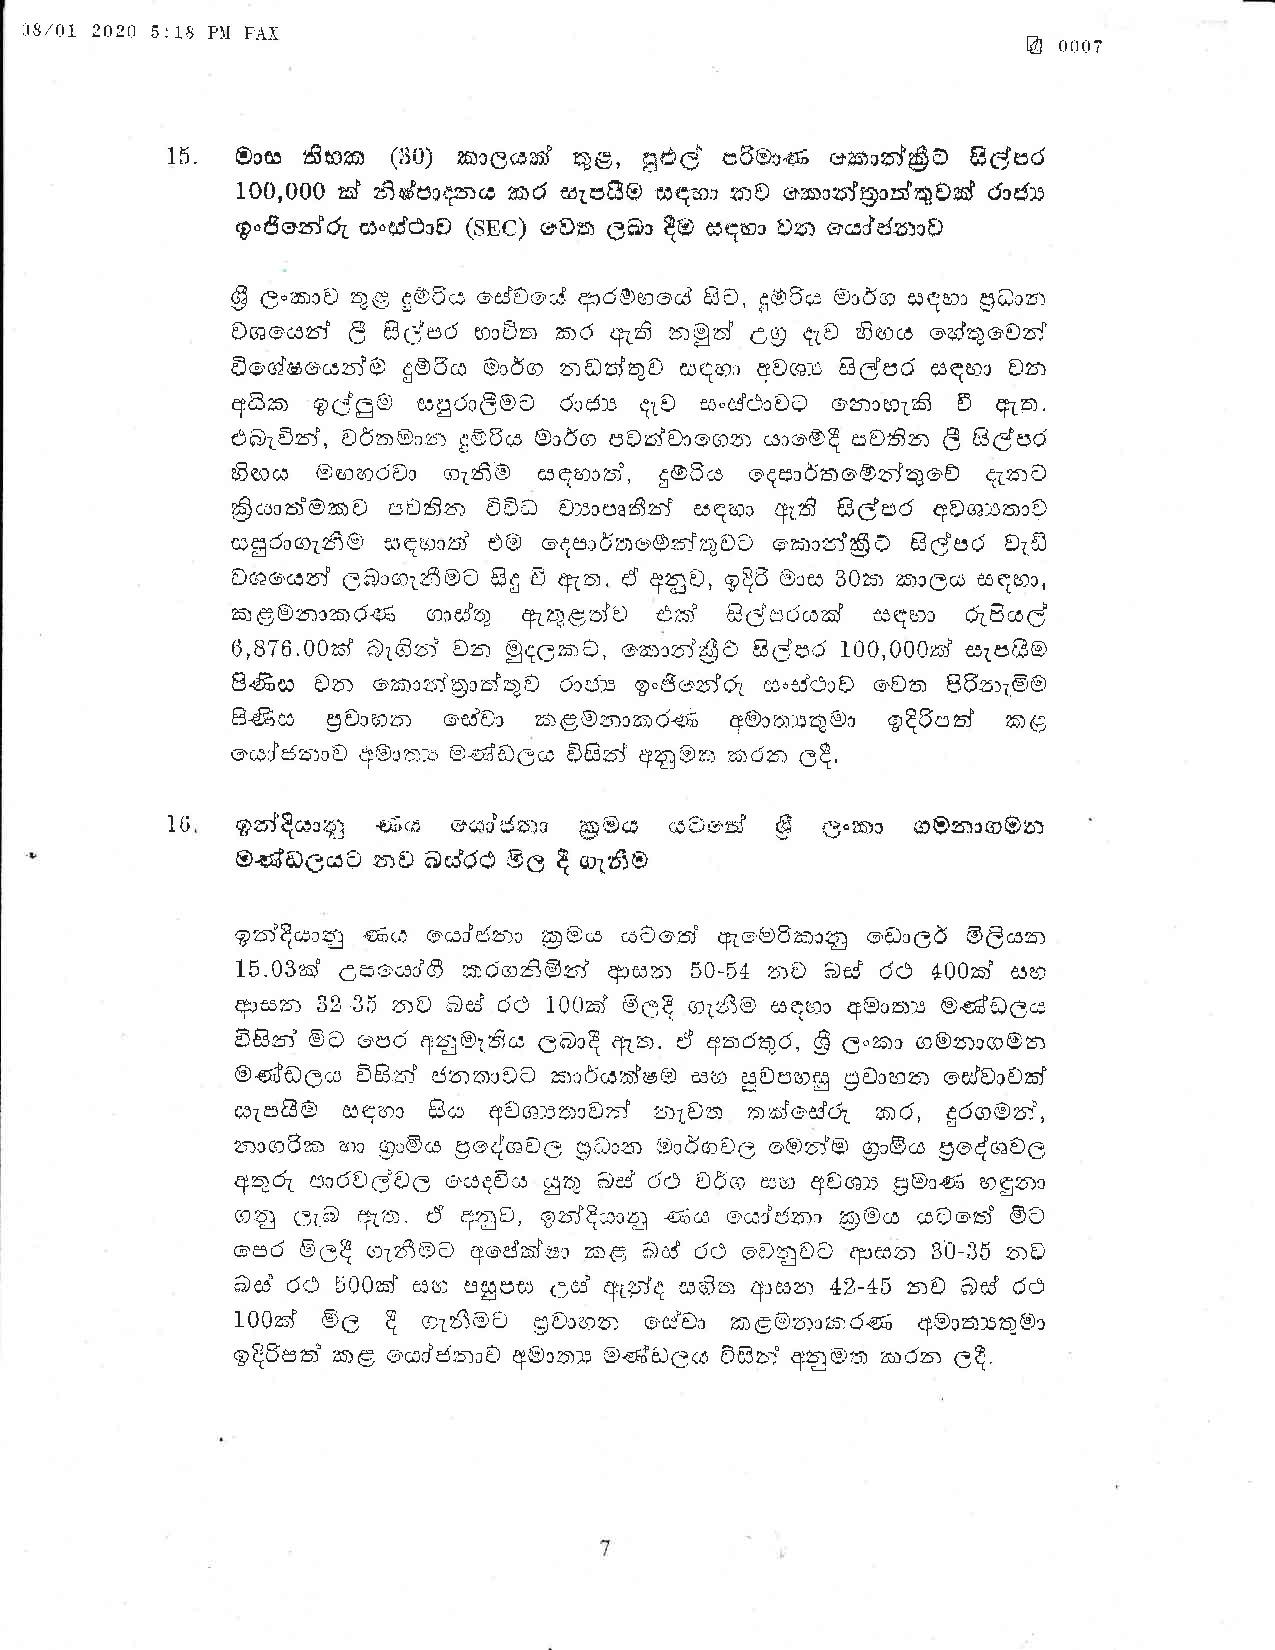 Cabinet Decision on 08.01.2020 page 007